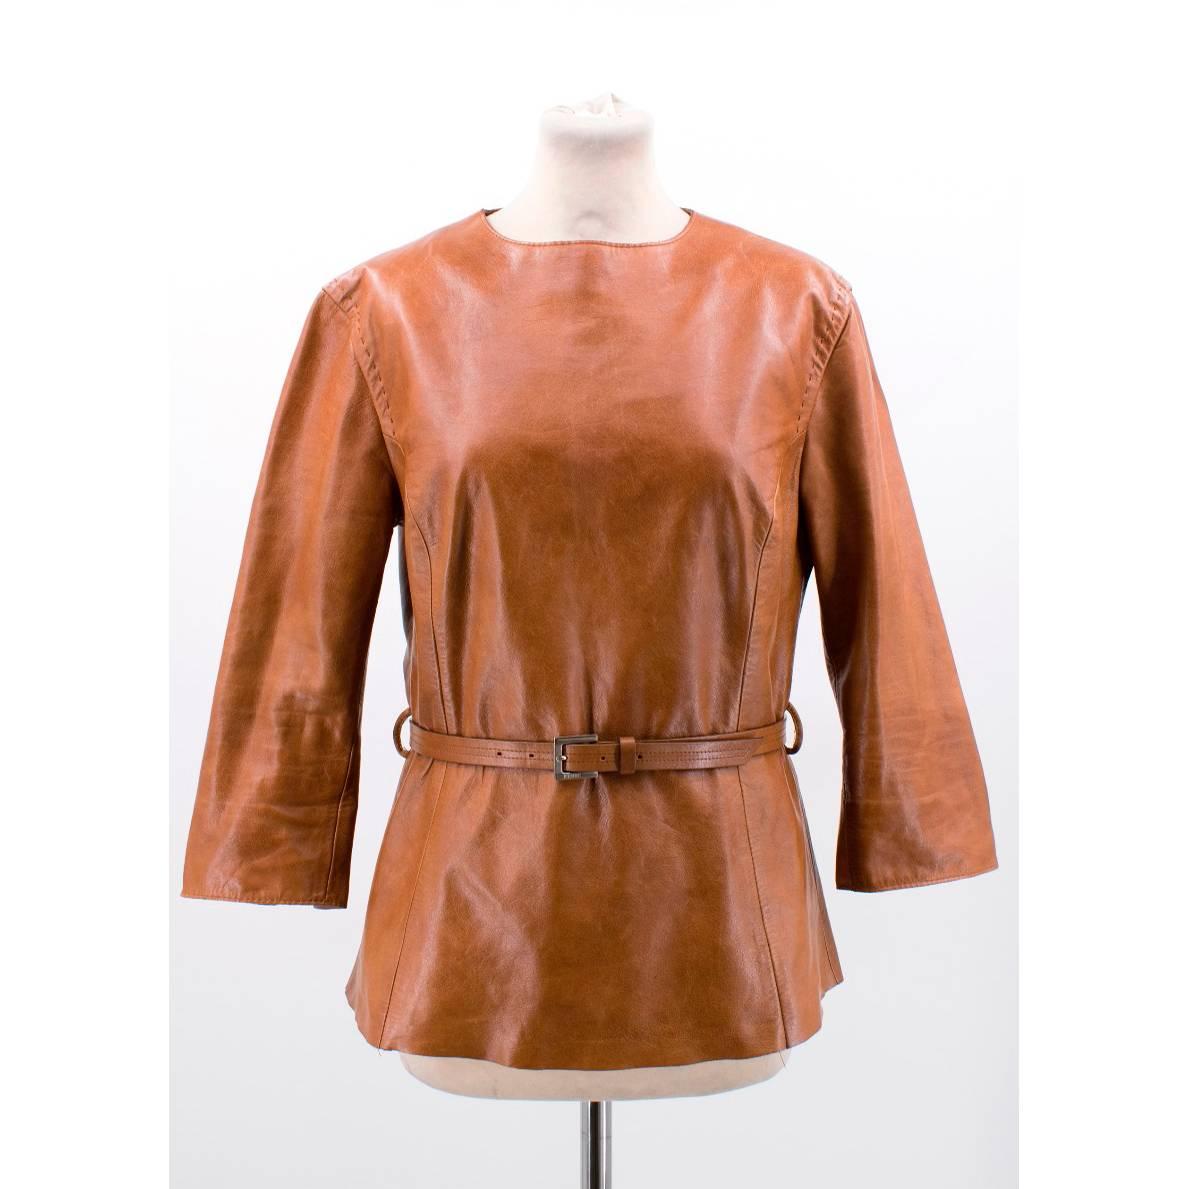 Gianfranco Ferre Leather Top For Sale 5